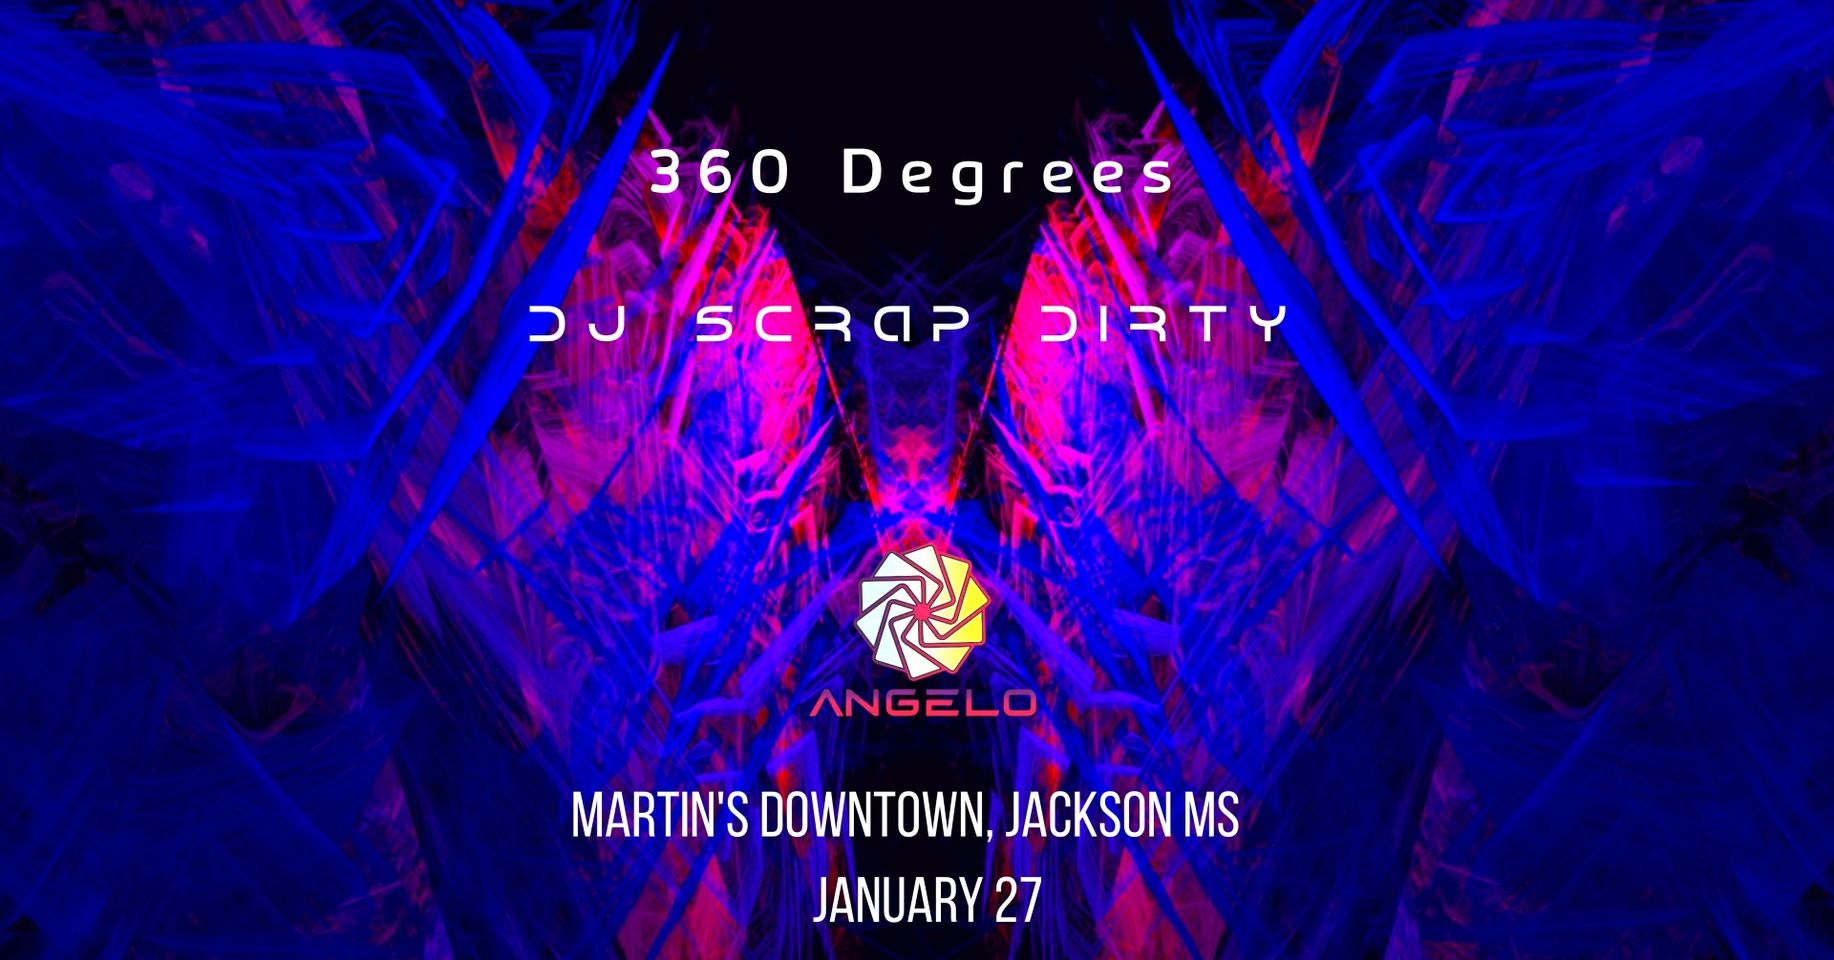 360 Degrees, DJ Scrap Dirty, ANGELO live at Martin’s Downtown